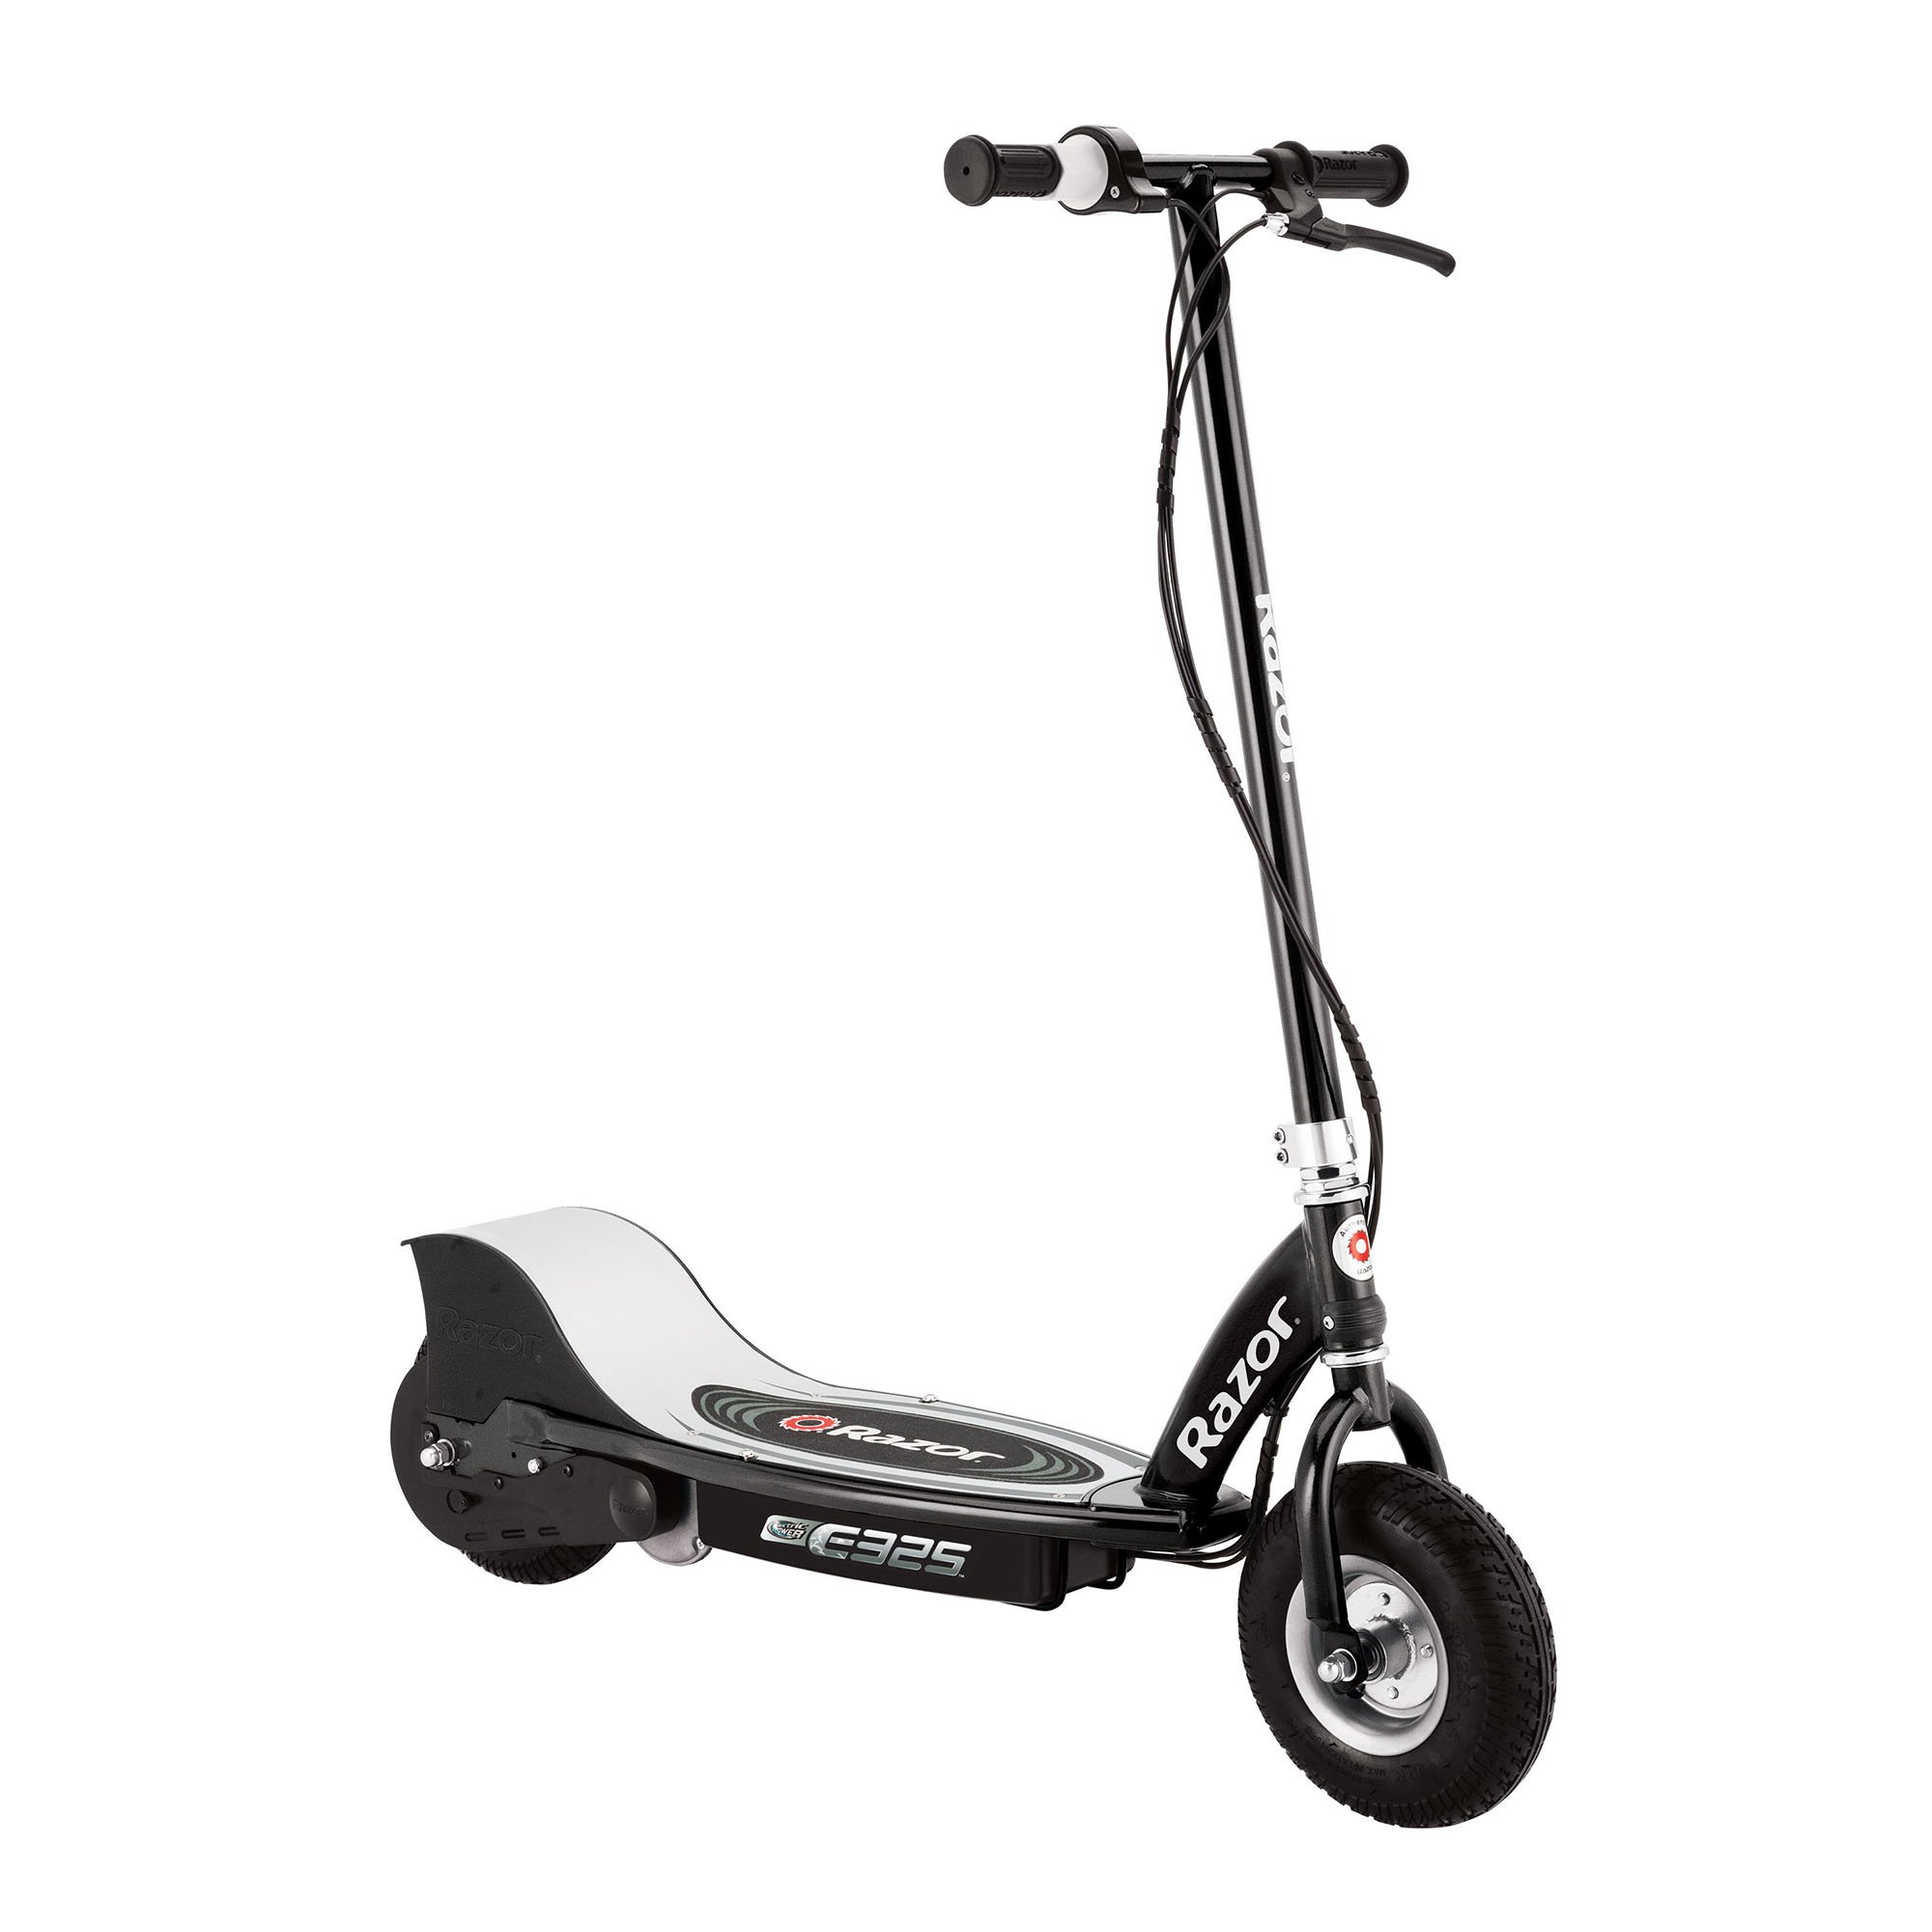 Razor Adult Ride-on 24v High-torque Motor Electric Scooter, Black in the Scooters department at Lowes.com